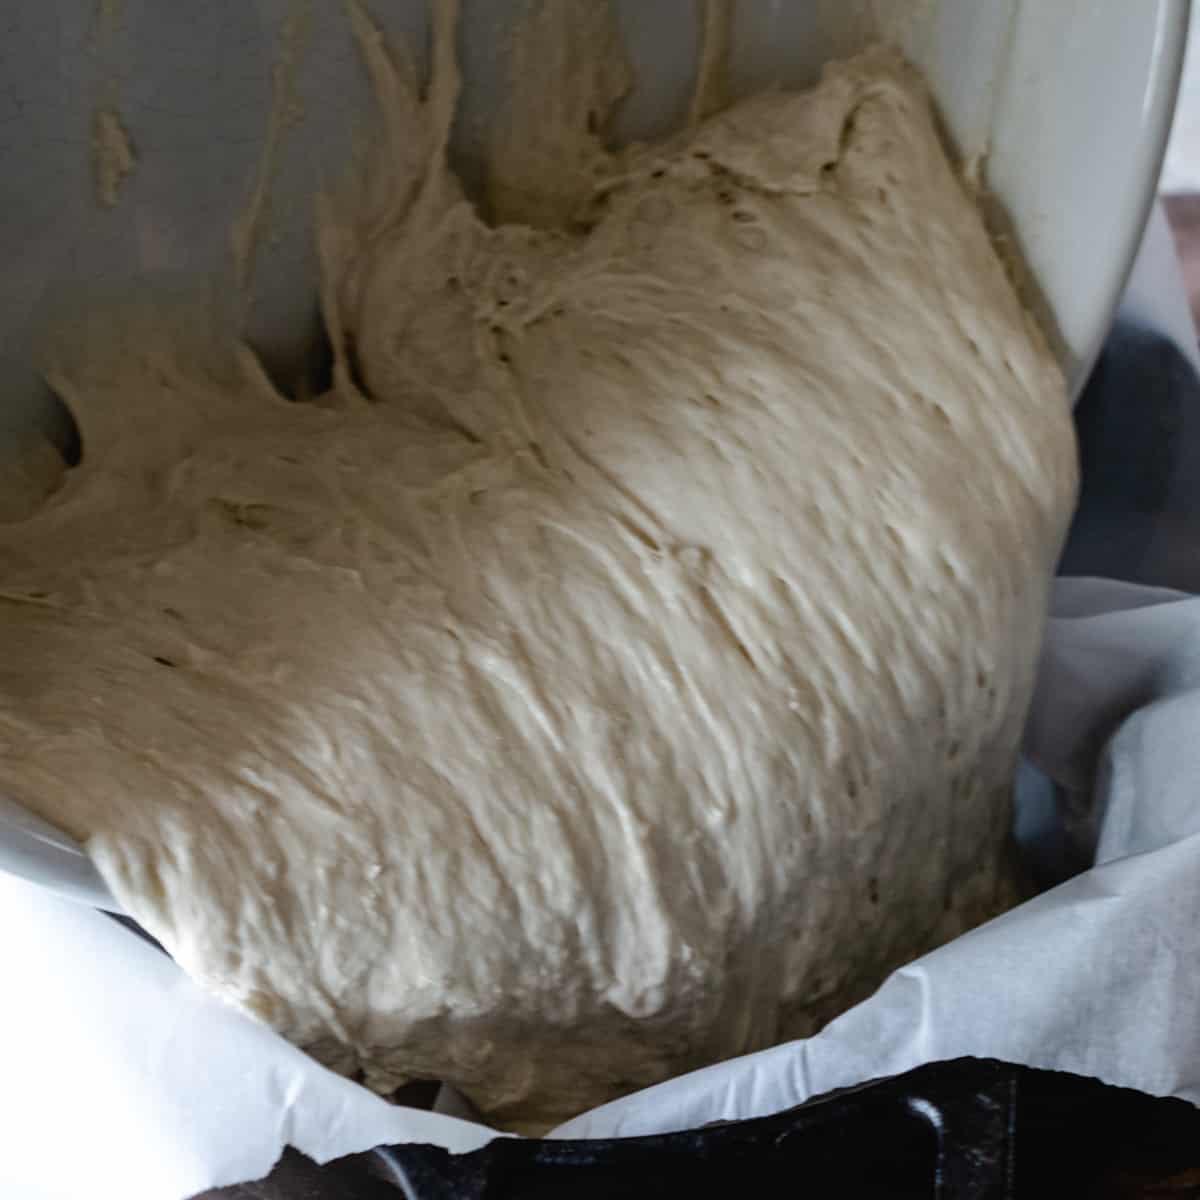 Transferring bread dough into a Dutch oven lined with parchment paper.